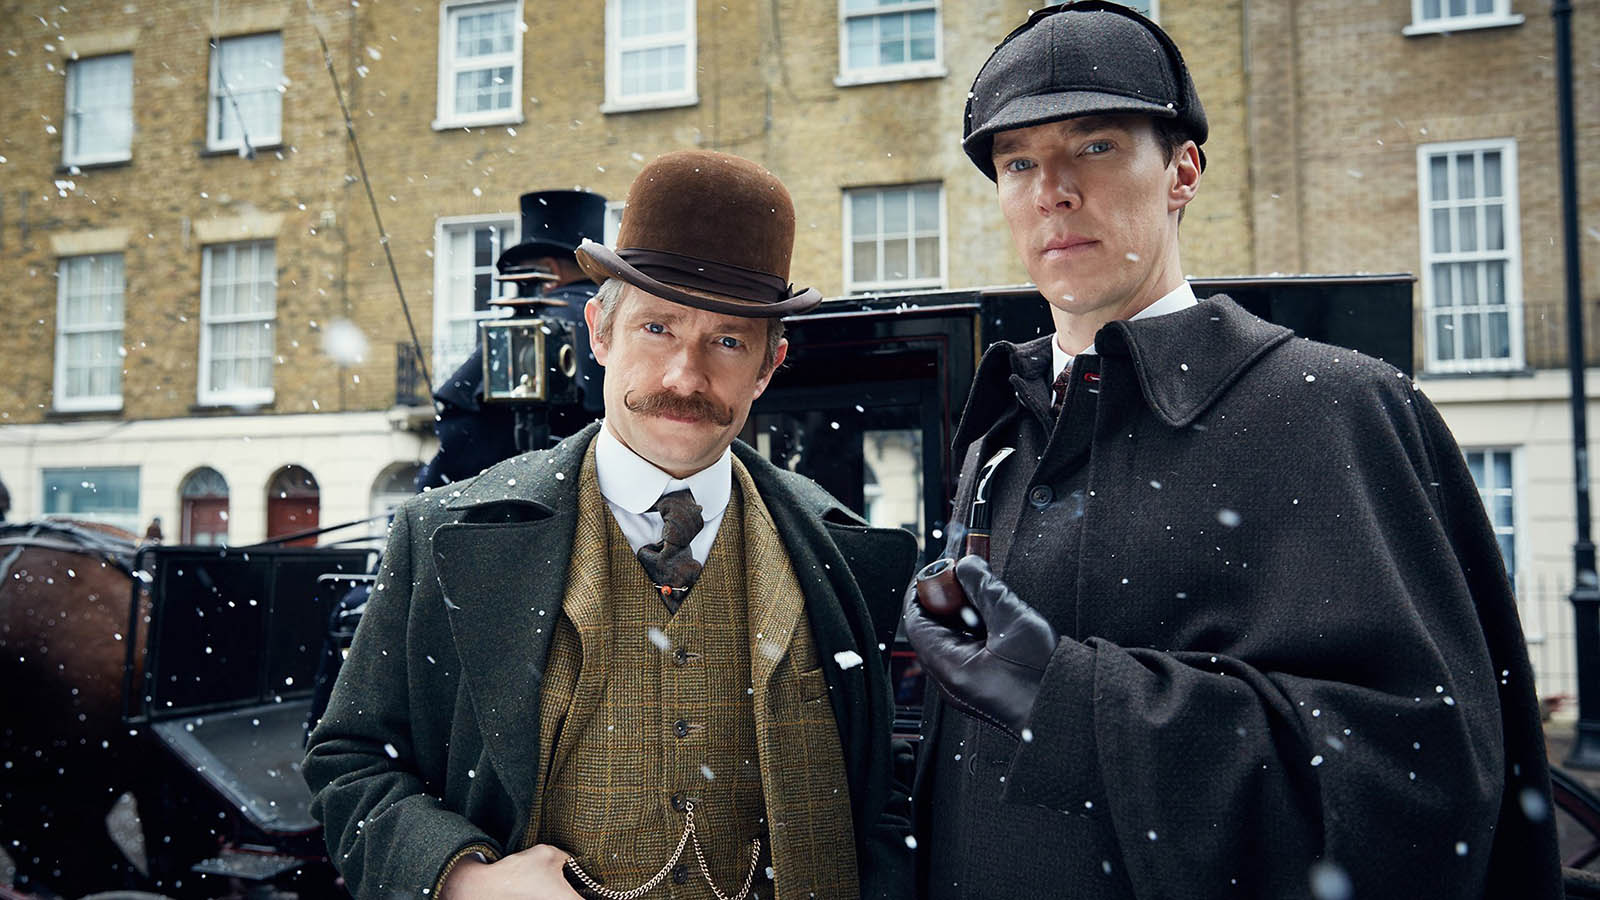 All Answers to This Trivia Quiz Are Numbers – Can You Get at Least 15/20? Sherlock Holmes